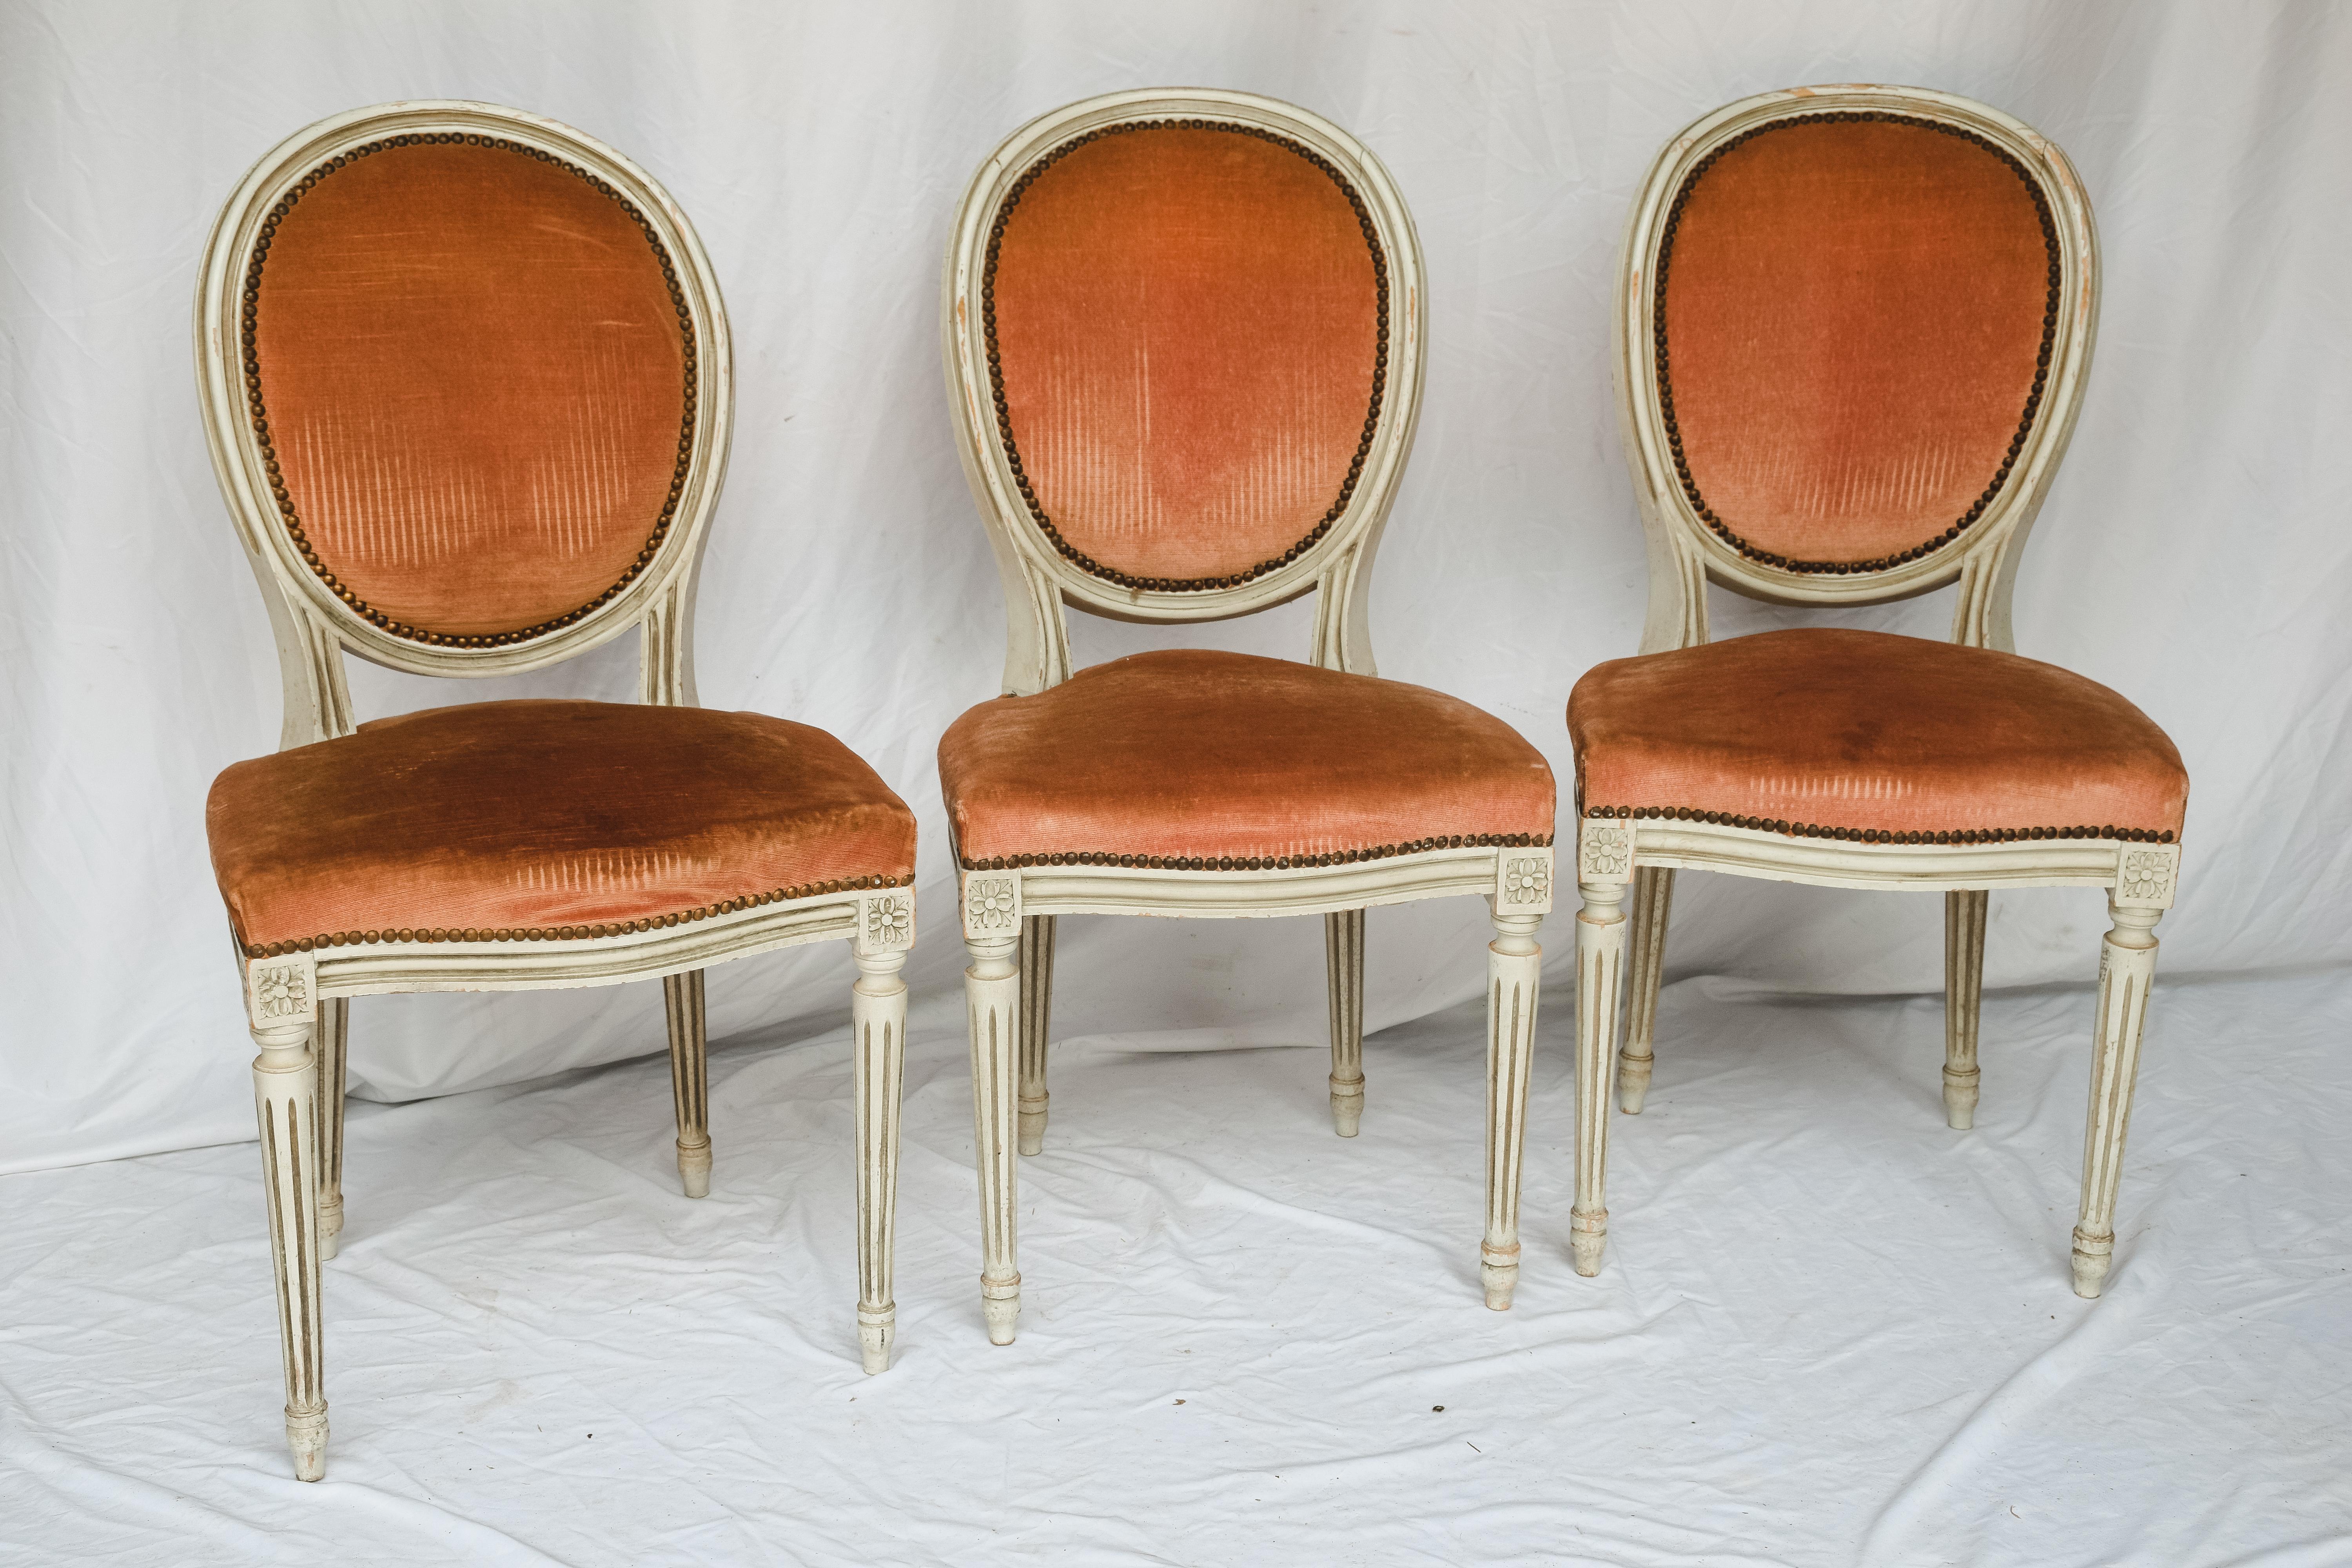 A charming Set of six Louis XVI -style painted dining room chairs- oval backs on fluted tapered legs. The set still appears to be covered in their original mohair fabric, although it definitely has seen better days. The padding on the chairs also